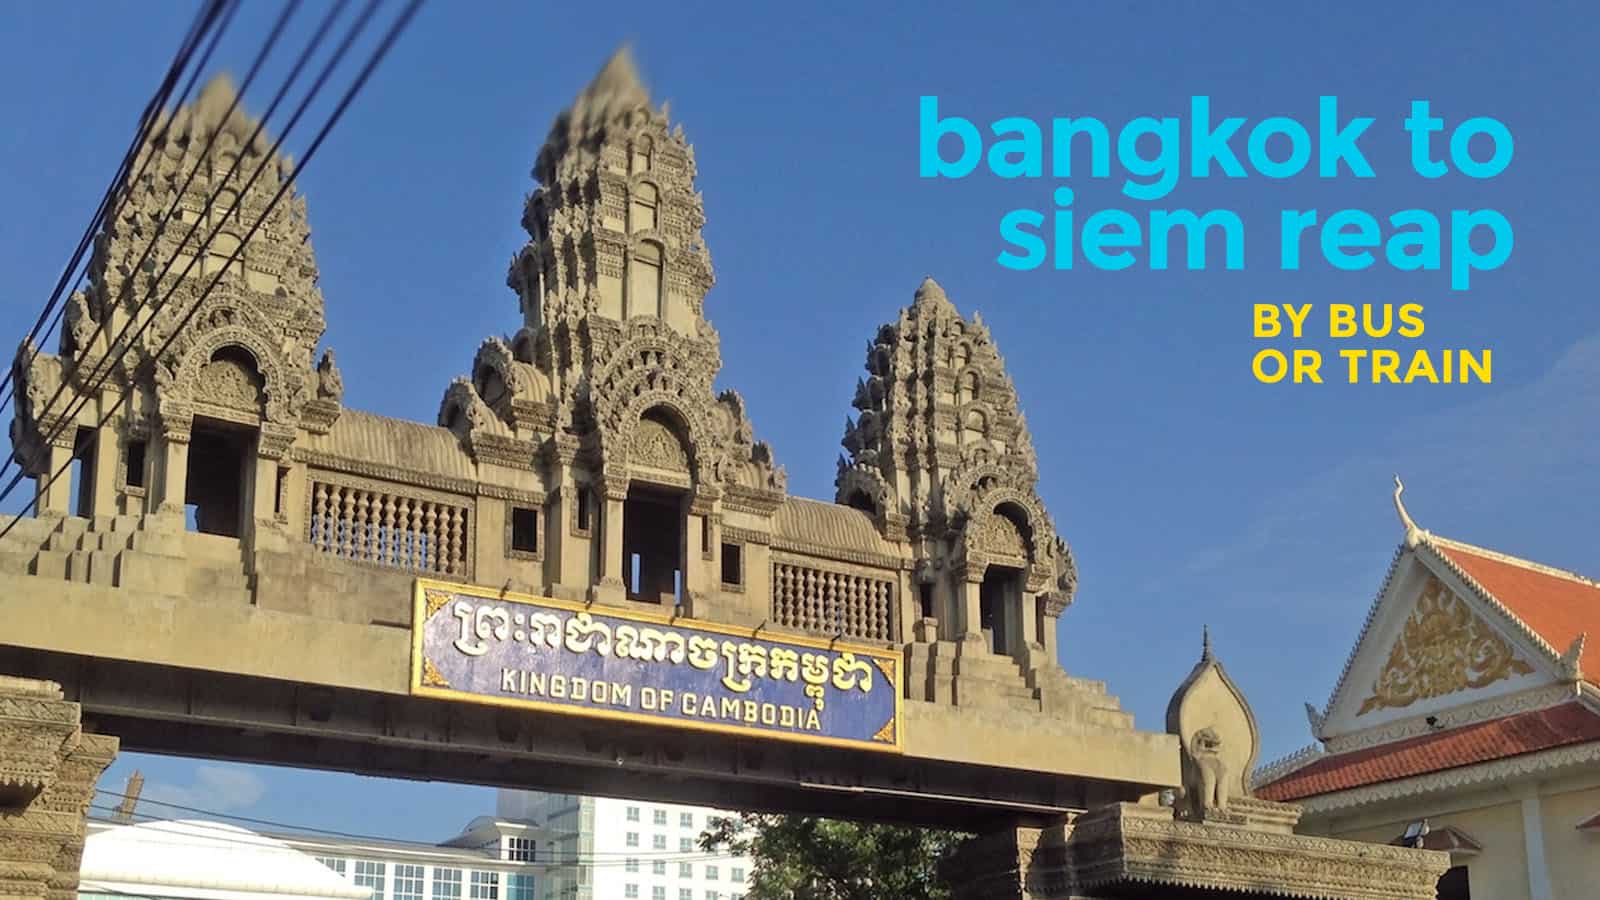 BANGKOK TO SIEM REAP by BUS or TRAIN: Crossing the Border